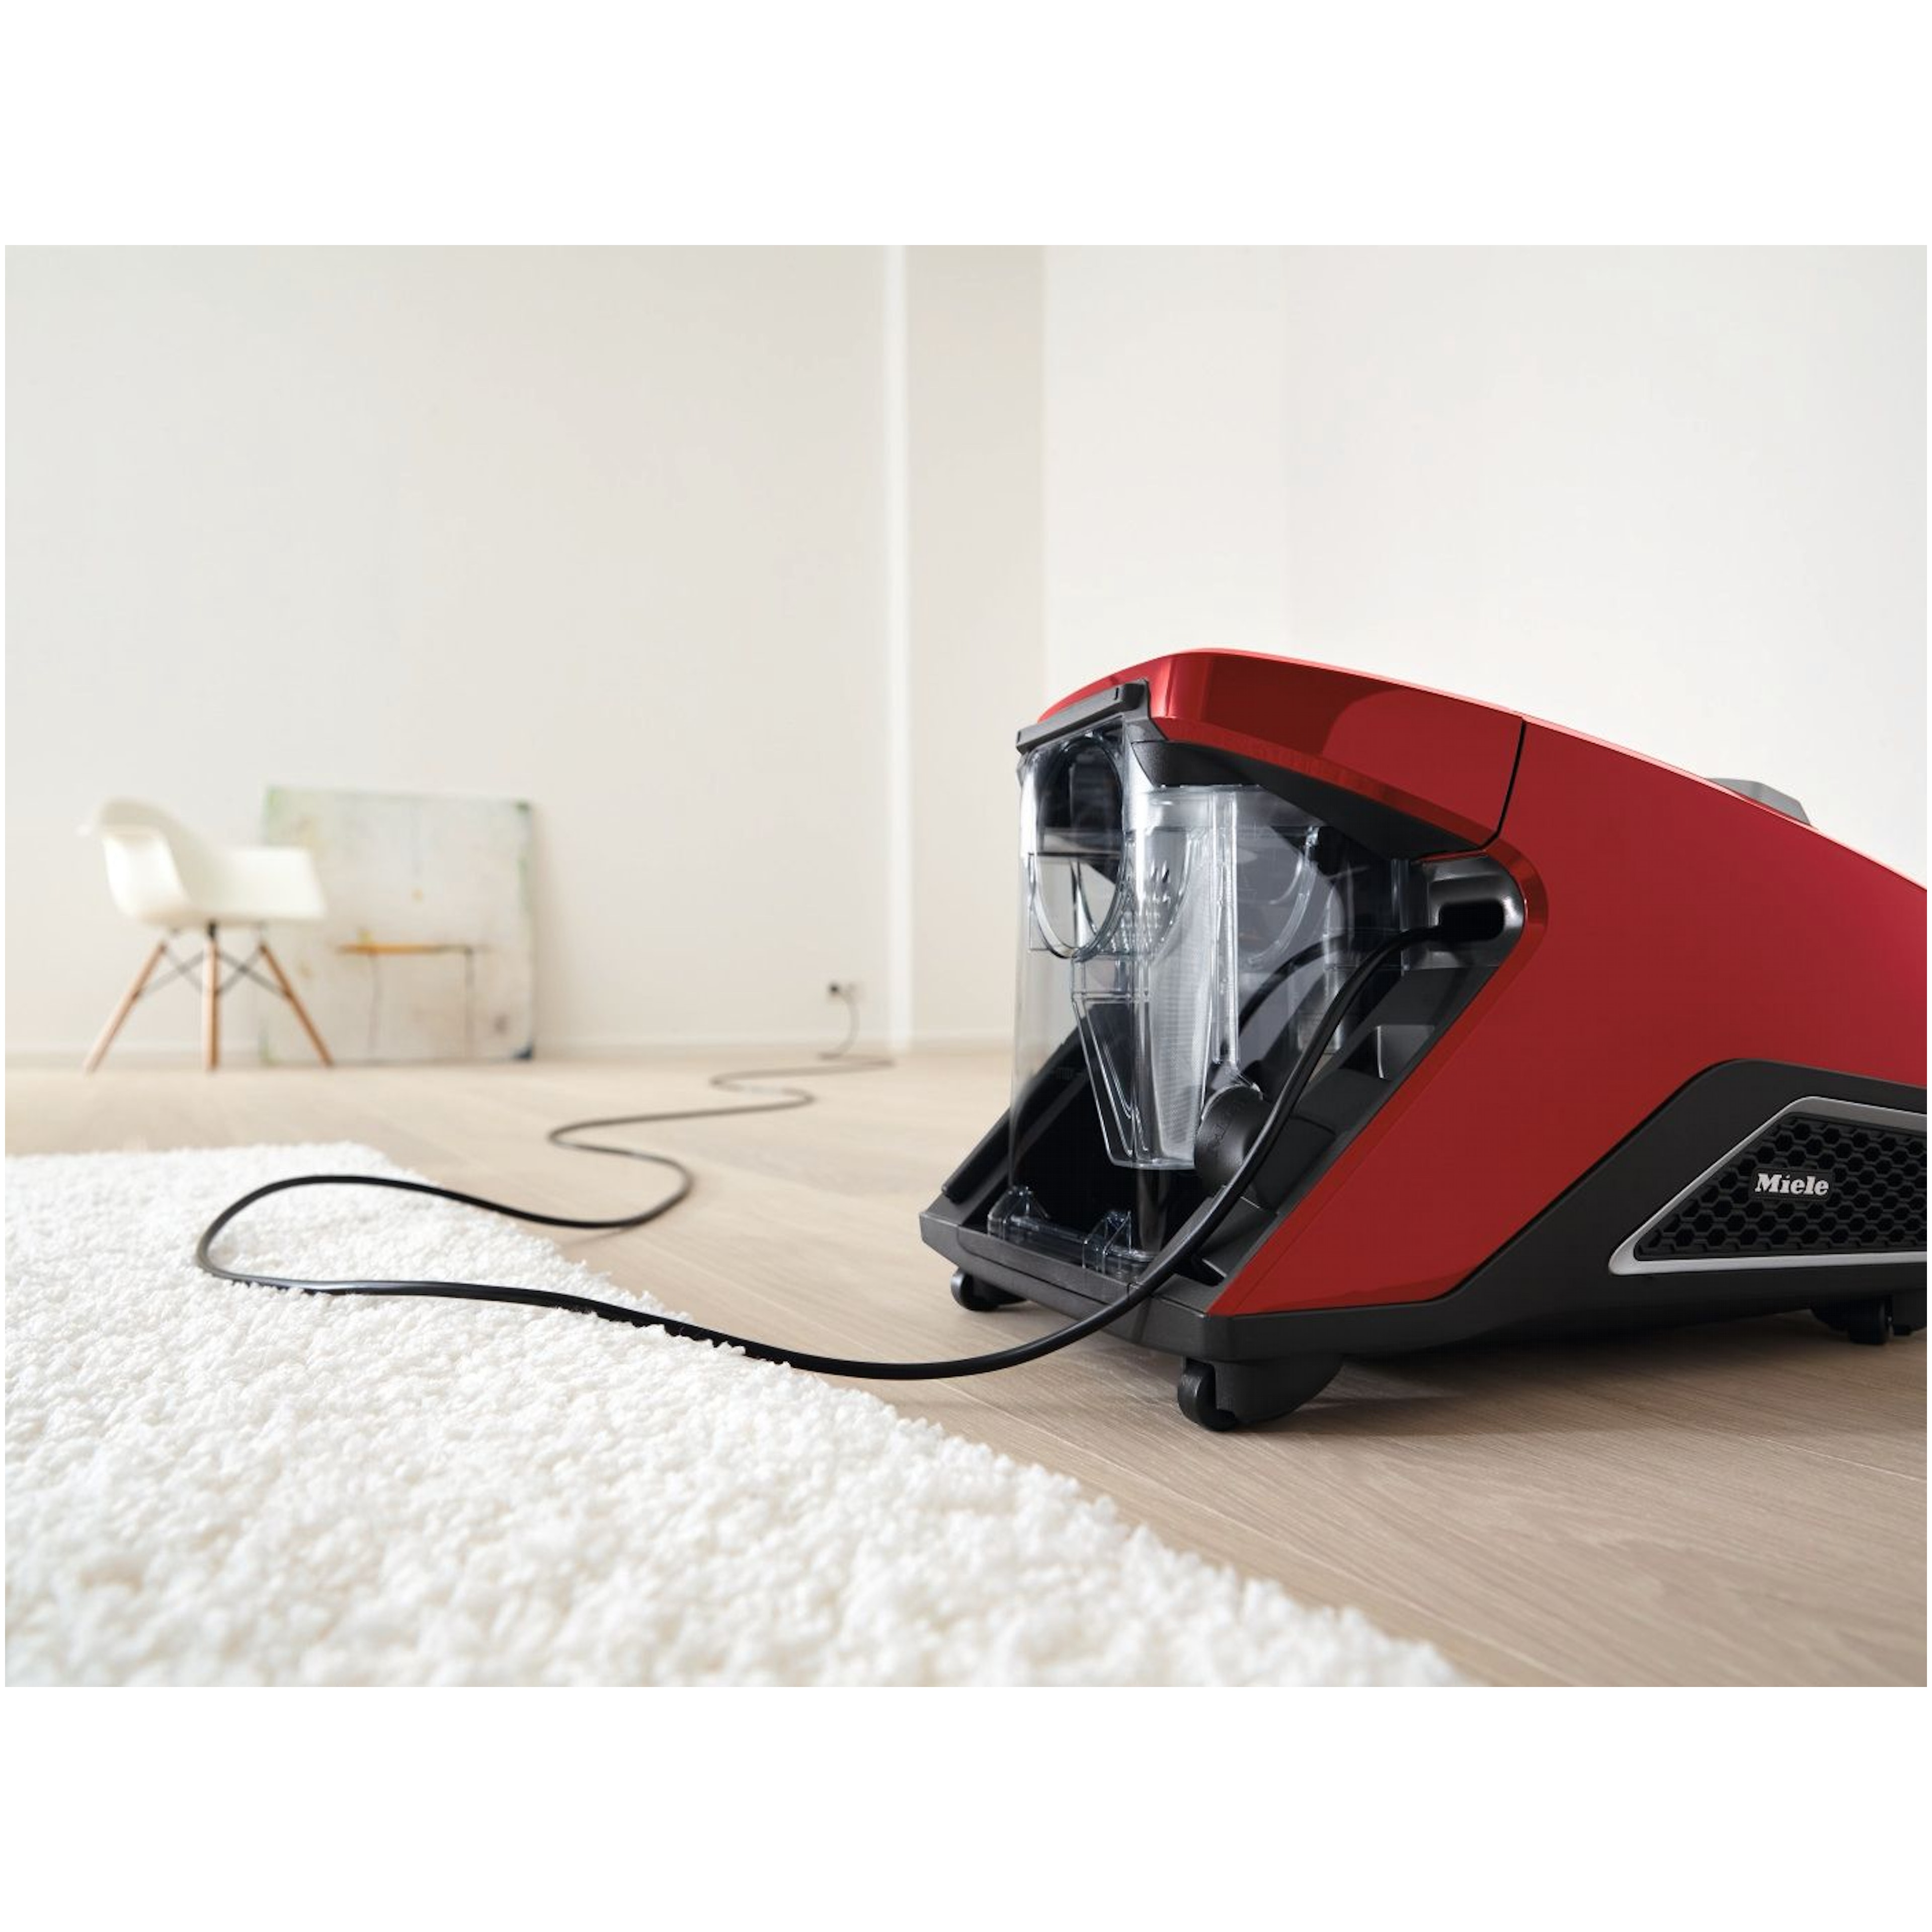 Miele stofzuiger  BLIZZARD CX1 RED afbeelding 4